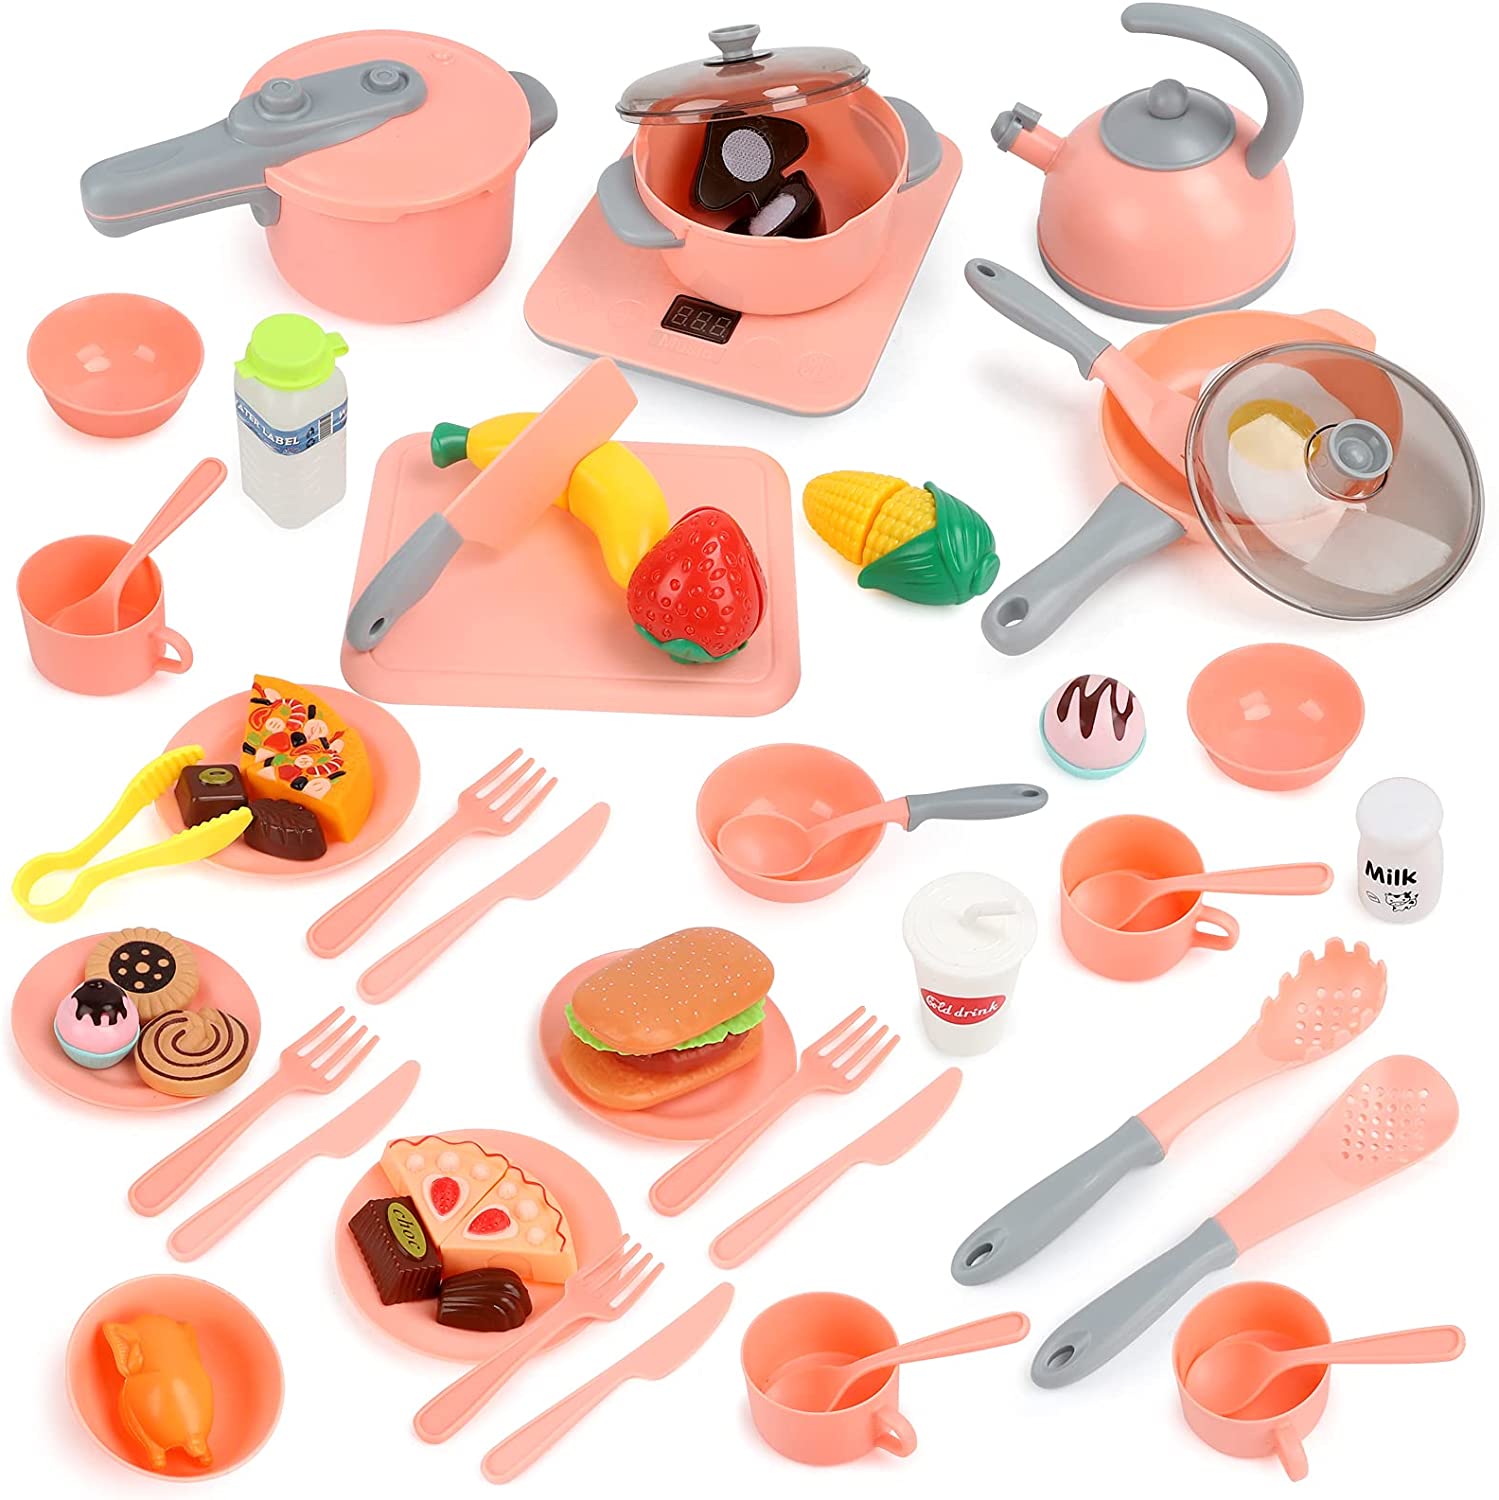 2021 Good Quality Wooden Food Toys - BeebeeRun Kids Kitchen Pretend Play Toys 61PCS Cooking Set for Toddlers Cookware Pots and Pans Playset, Cooking Utensils, Toy Cutlery, Cutting Play Food –...